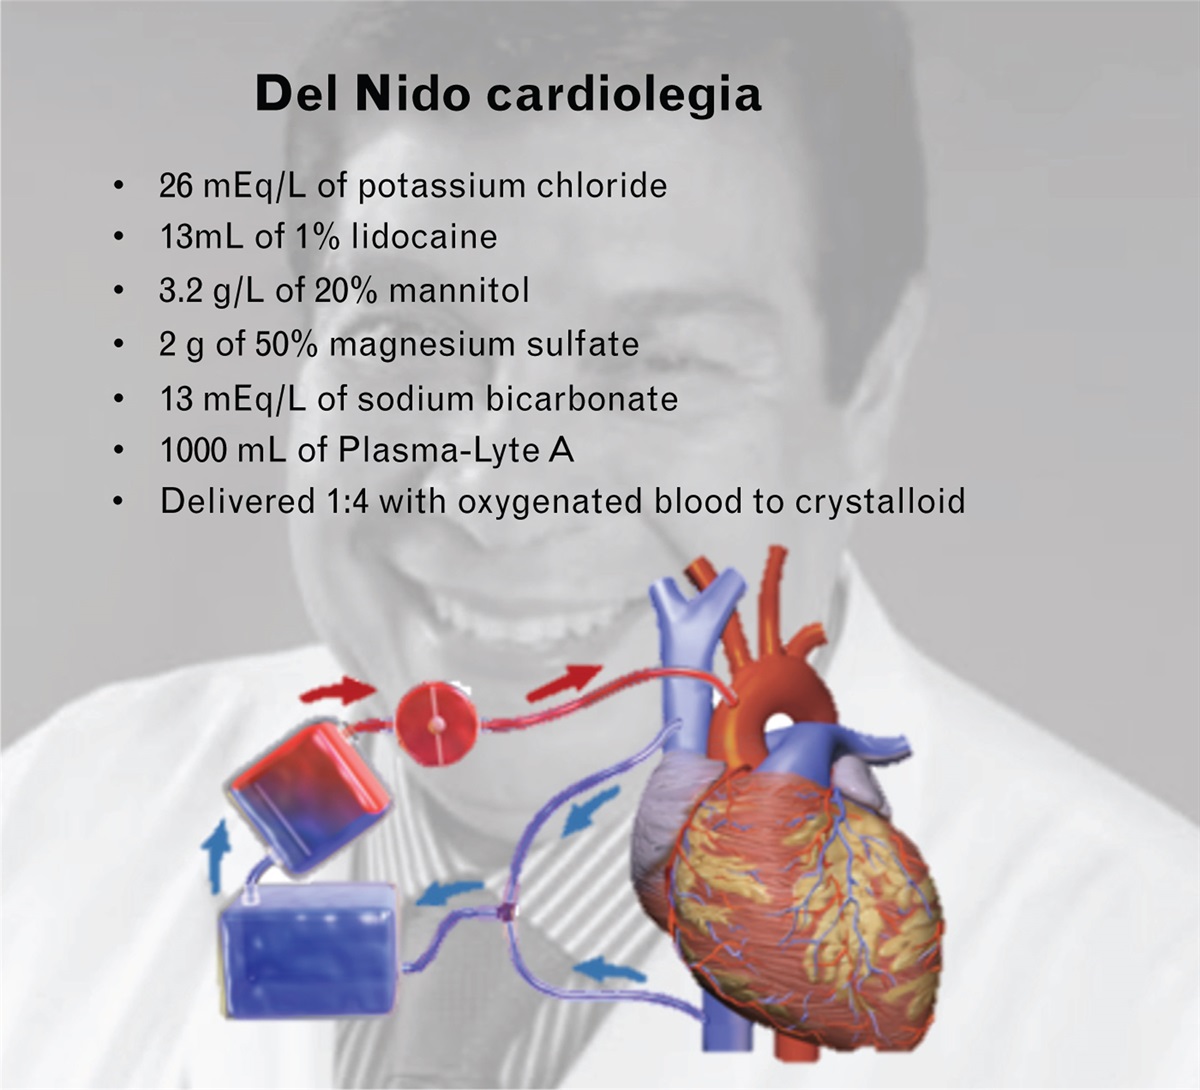 Del Nido cardioplegia for cardiac surgery requiring cardiopulmonary bypass: is the best yet to come?